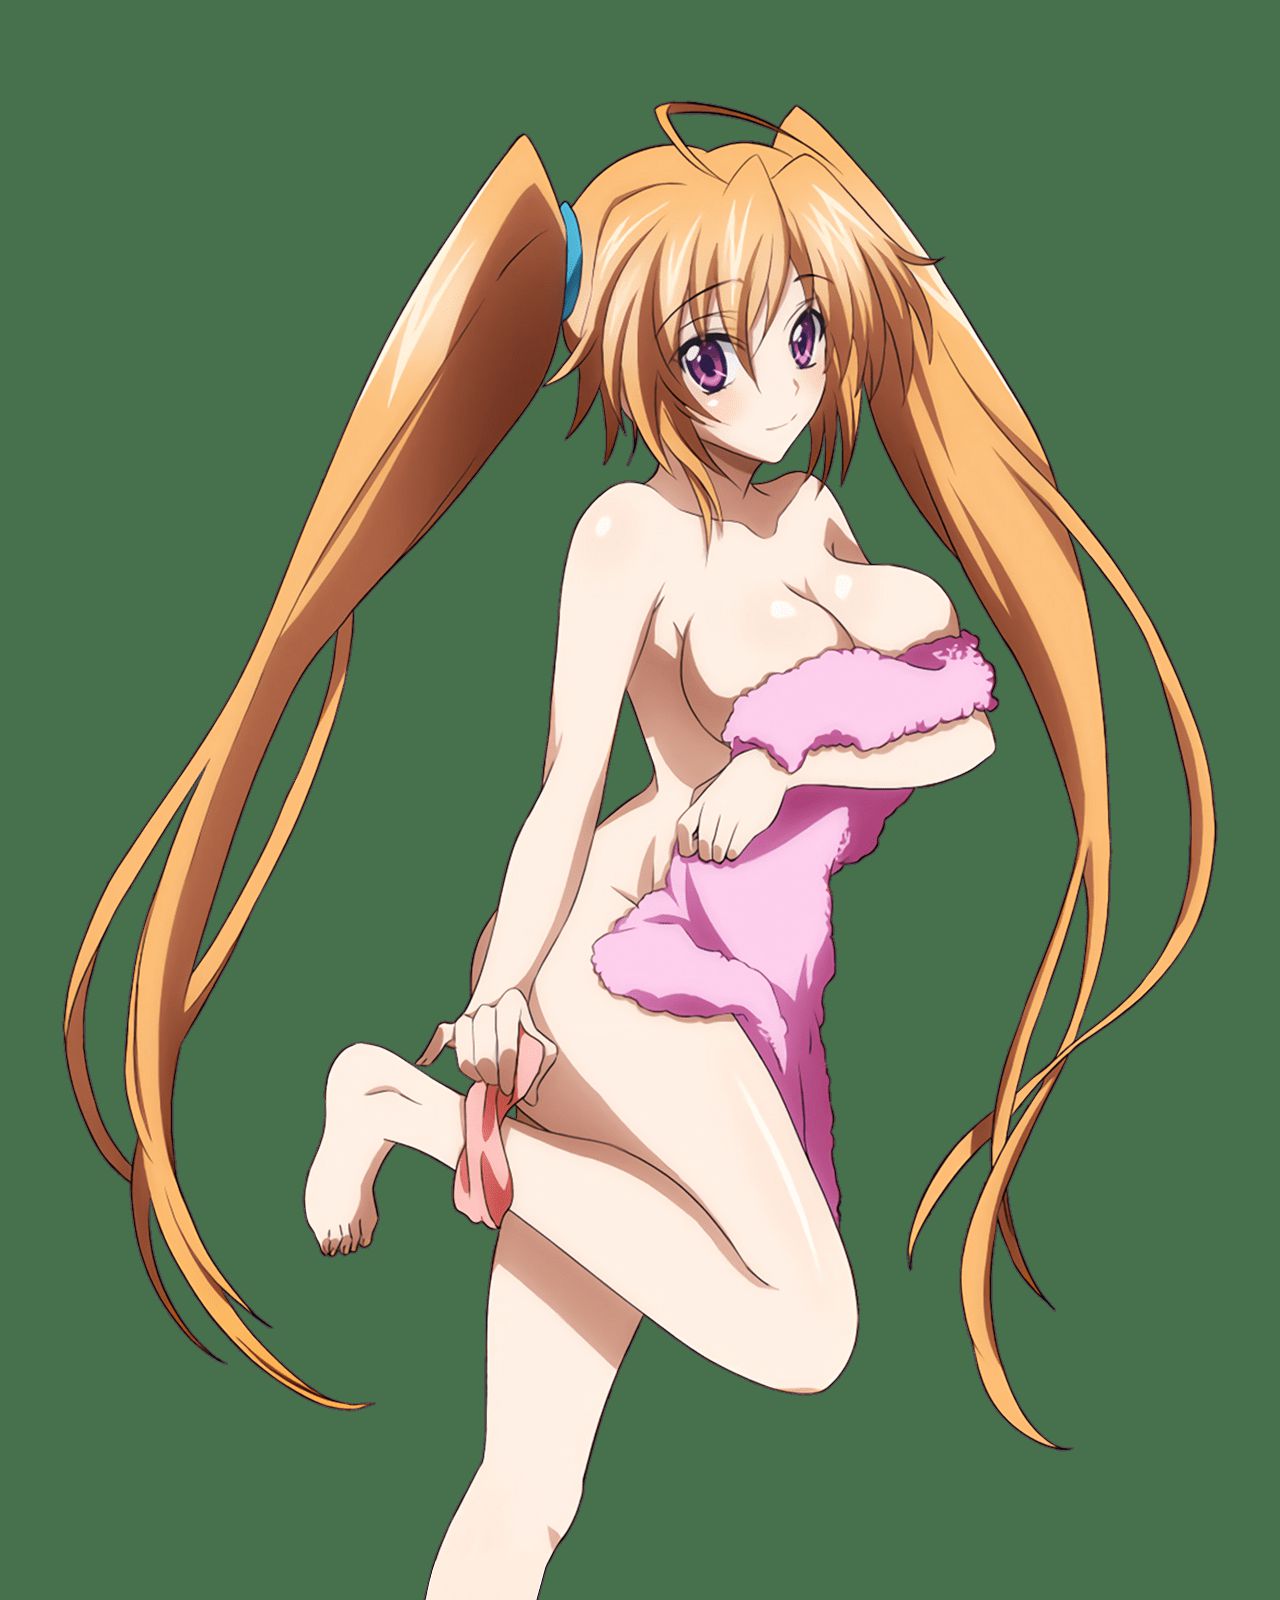 [Anime character material] png background of animated characters erotic images that 161 19